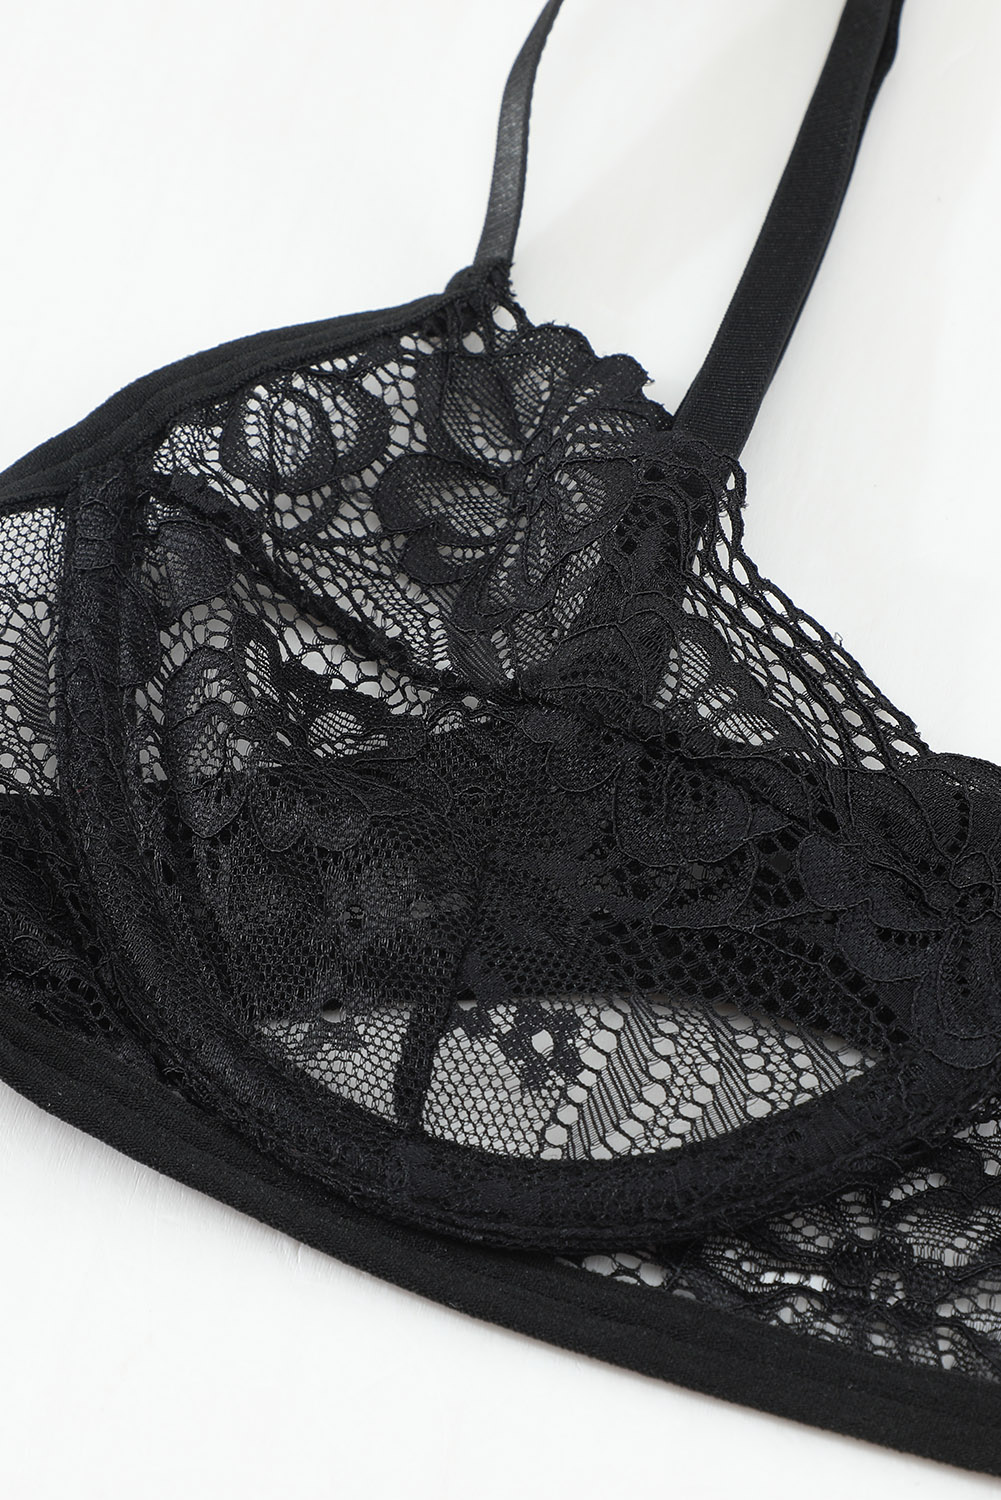 US$ 4.37 Drop-shipping Black Blossom Balcony&Thong for Women